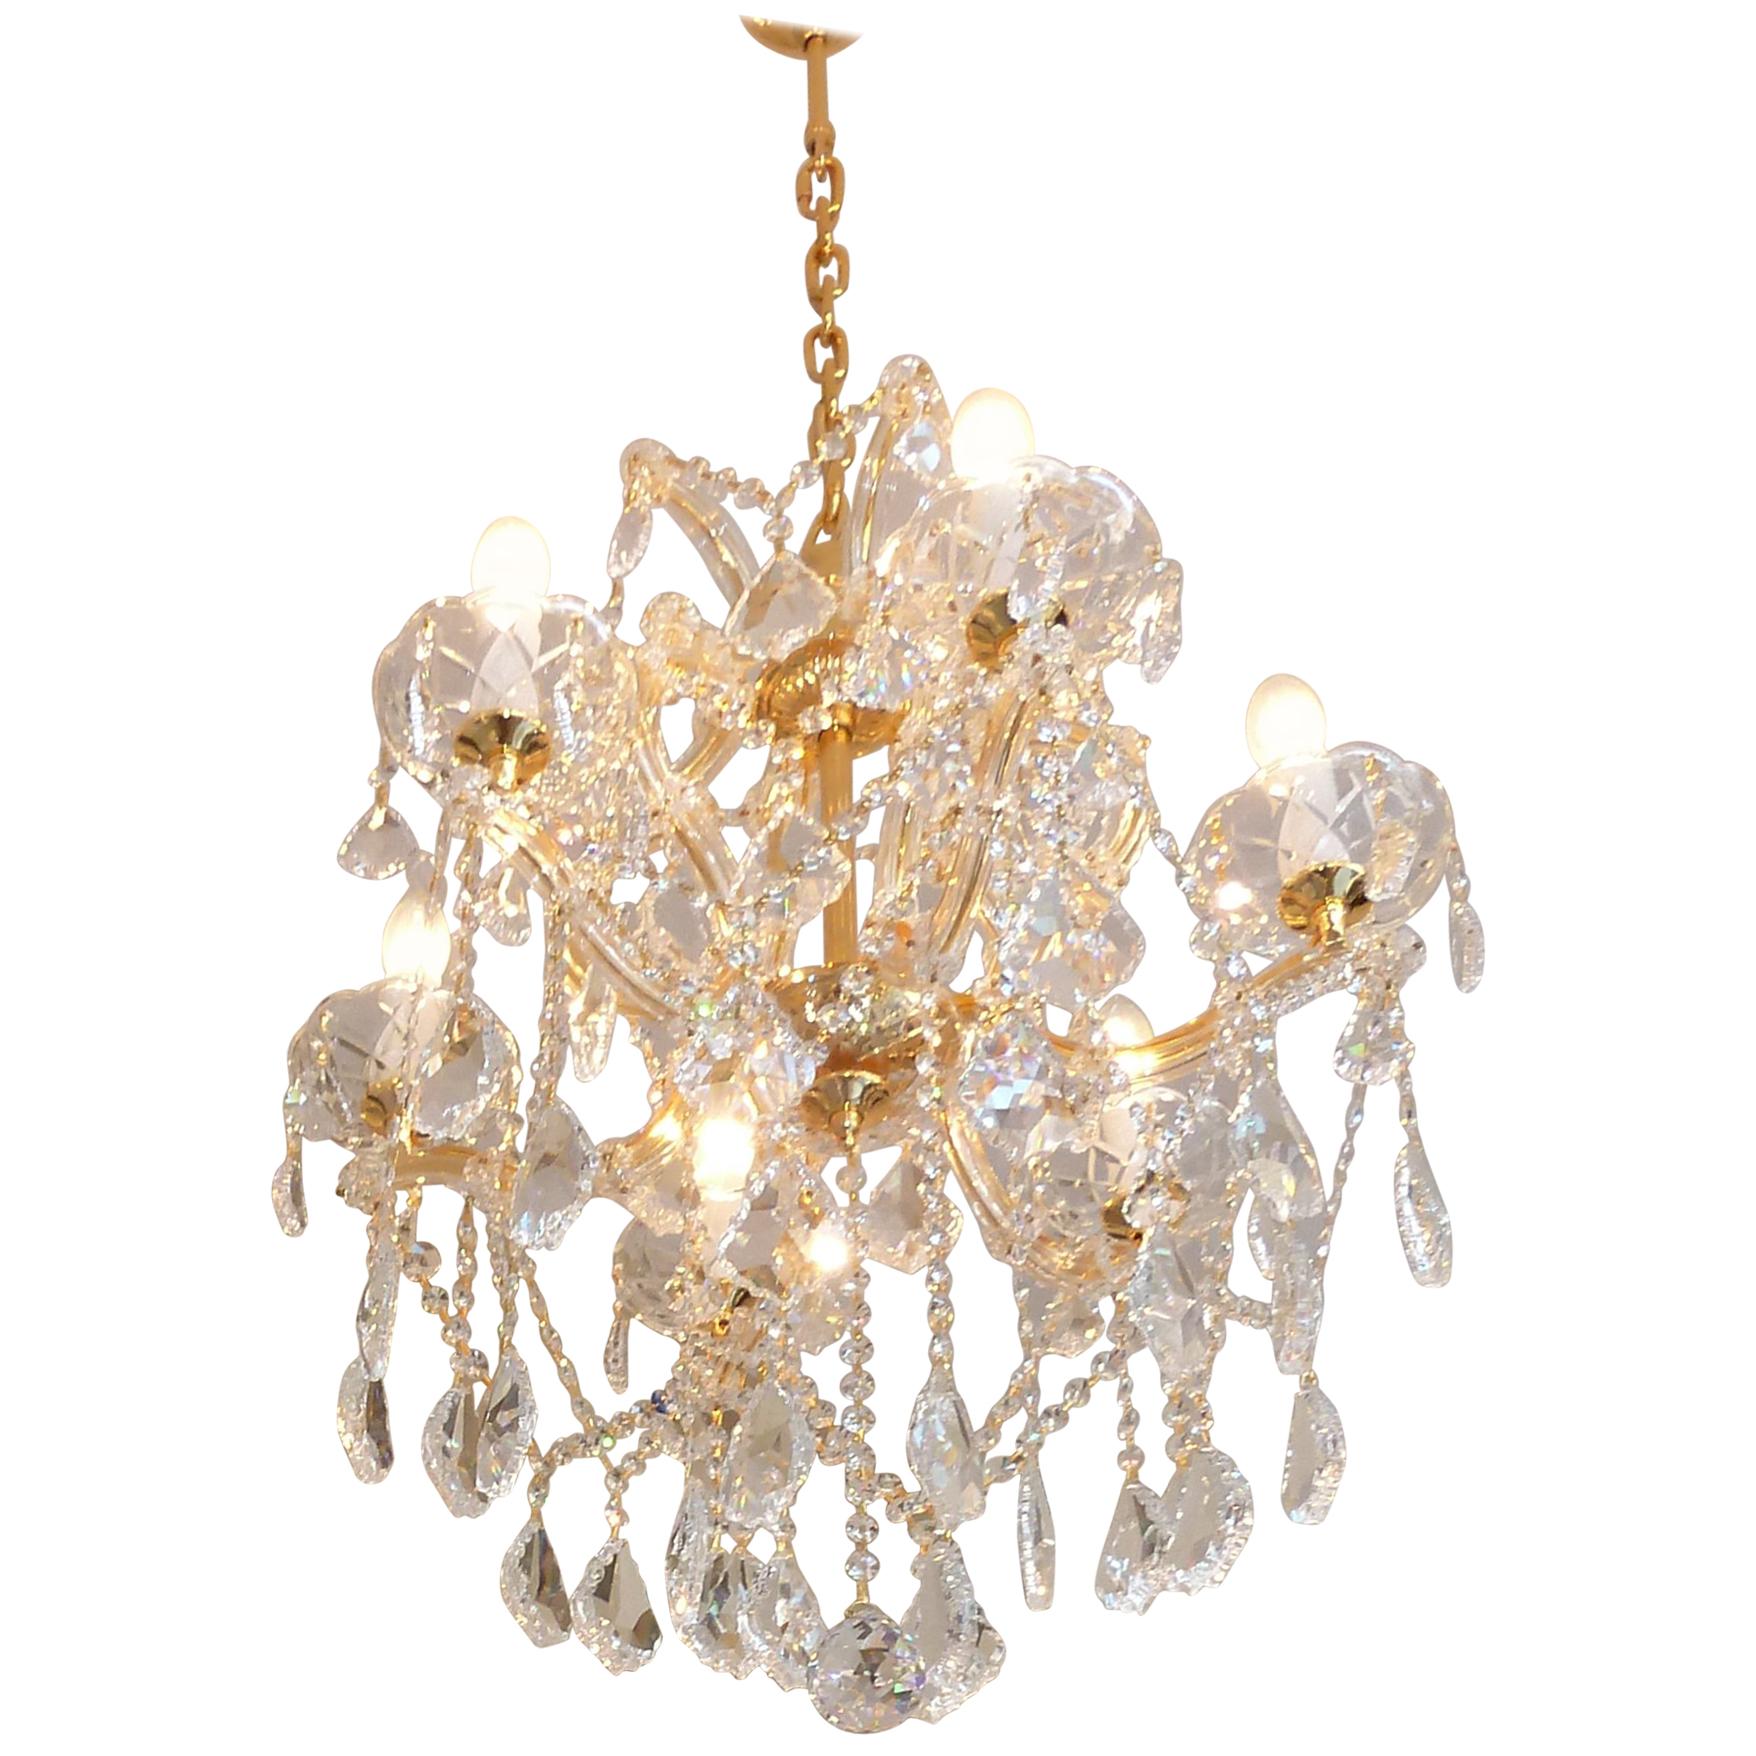 Crystal Chandelier "Maria Theresia" with Swarovski Crystals For Sale